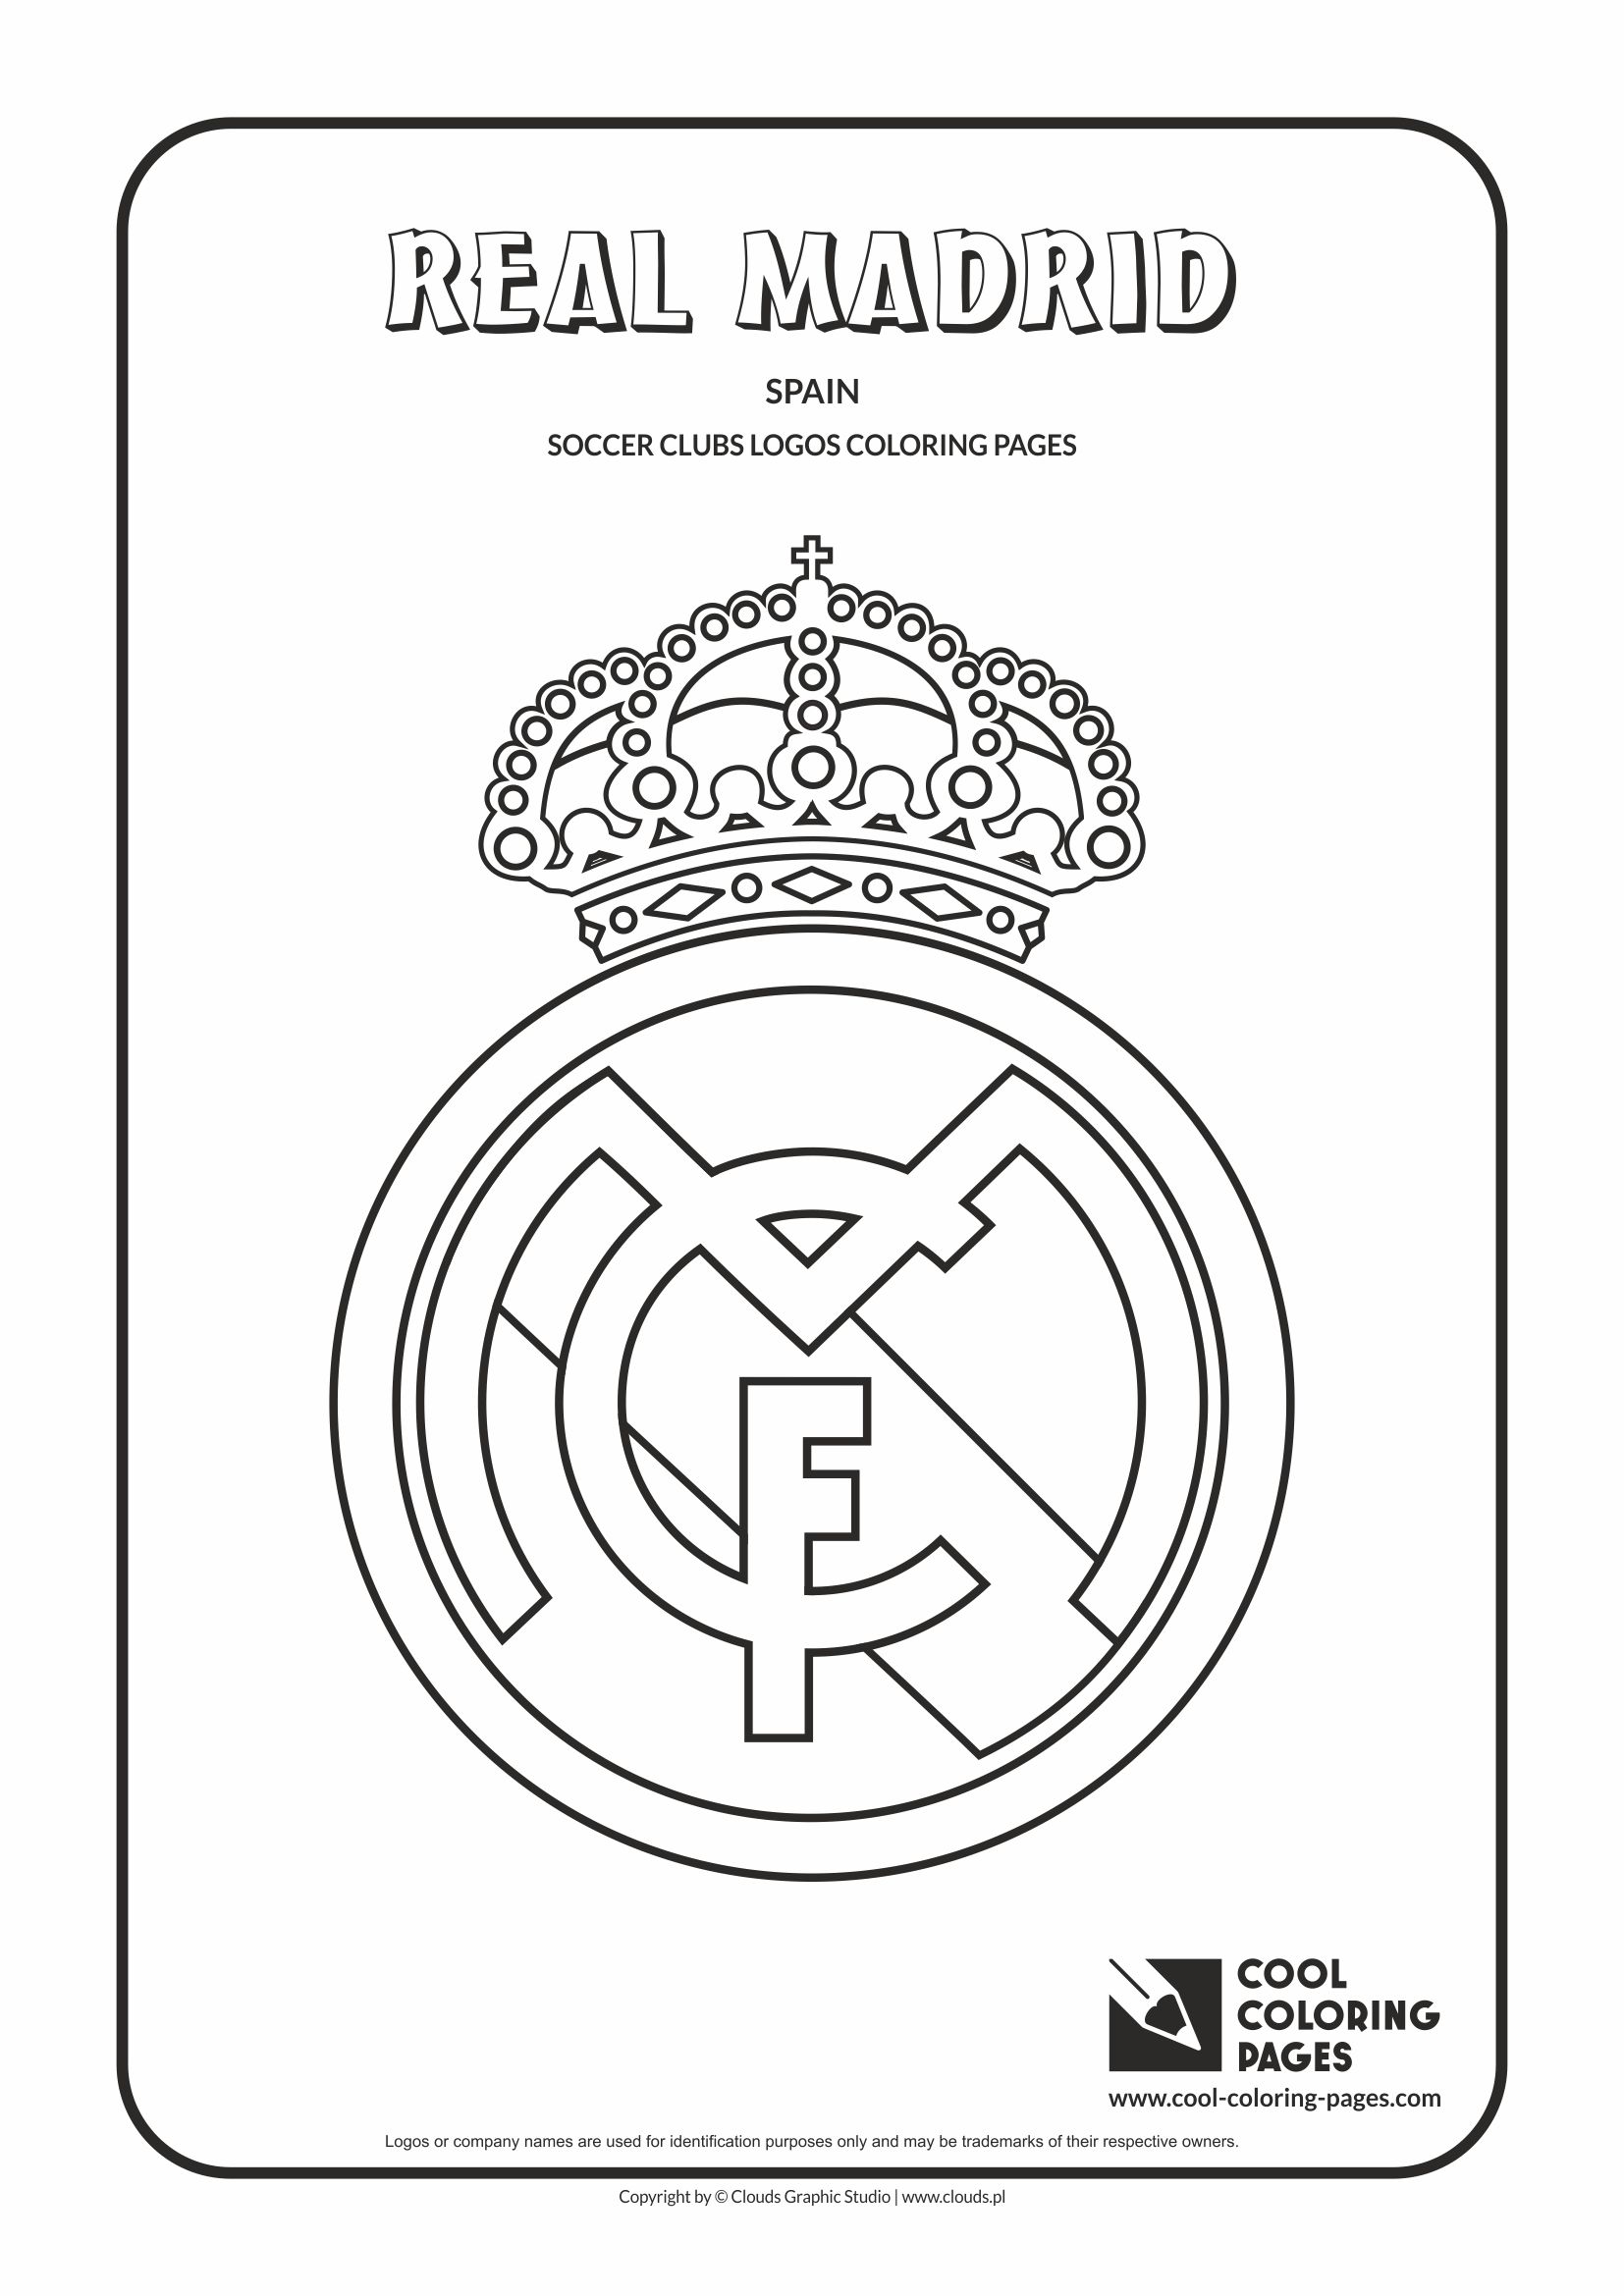 Cool Coloring Pages Soccer clubs logos - Cool Coloring Pages | Free  educational coloring pages and activities for kids